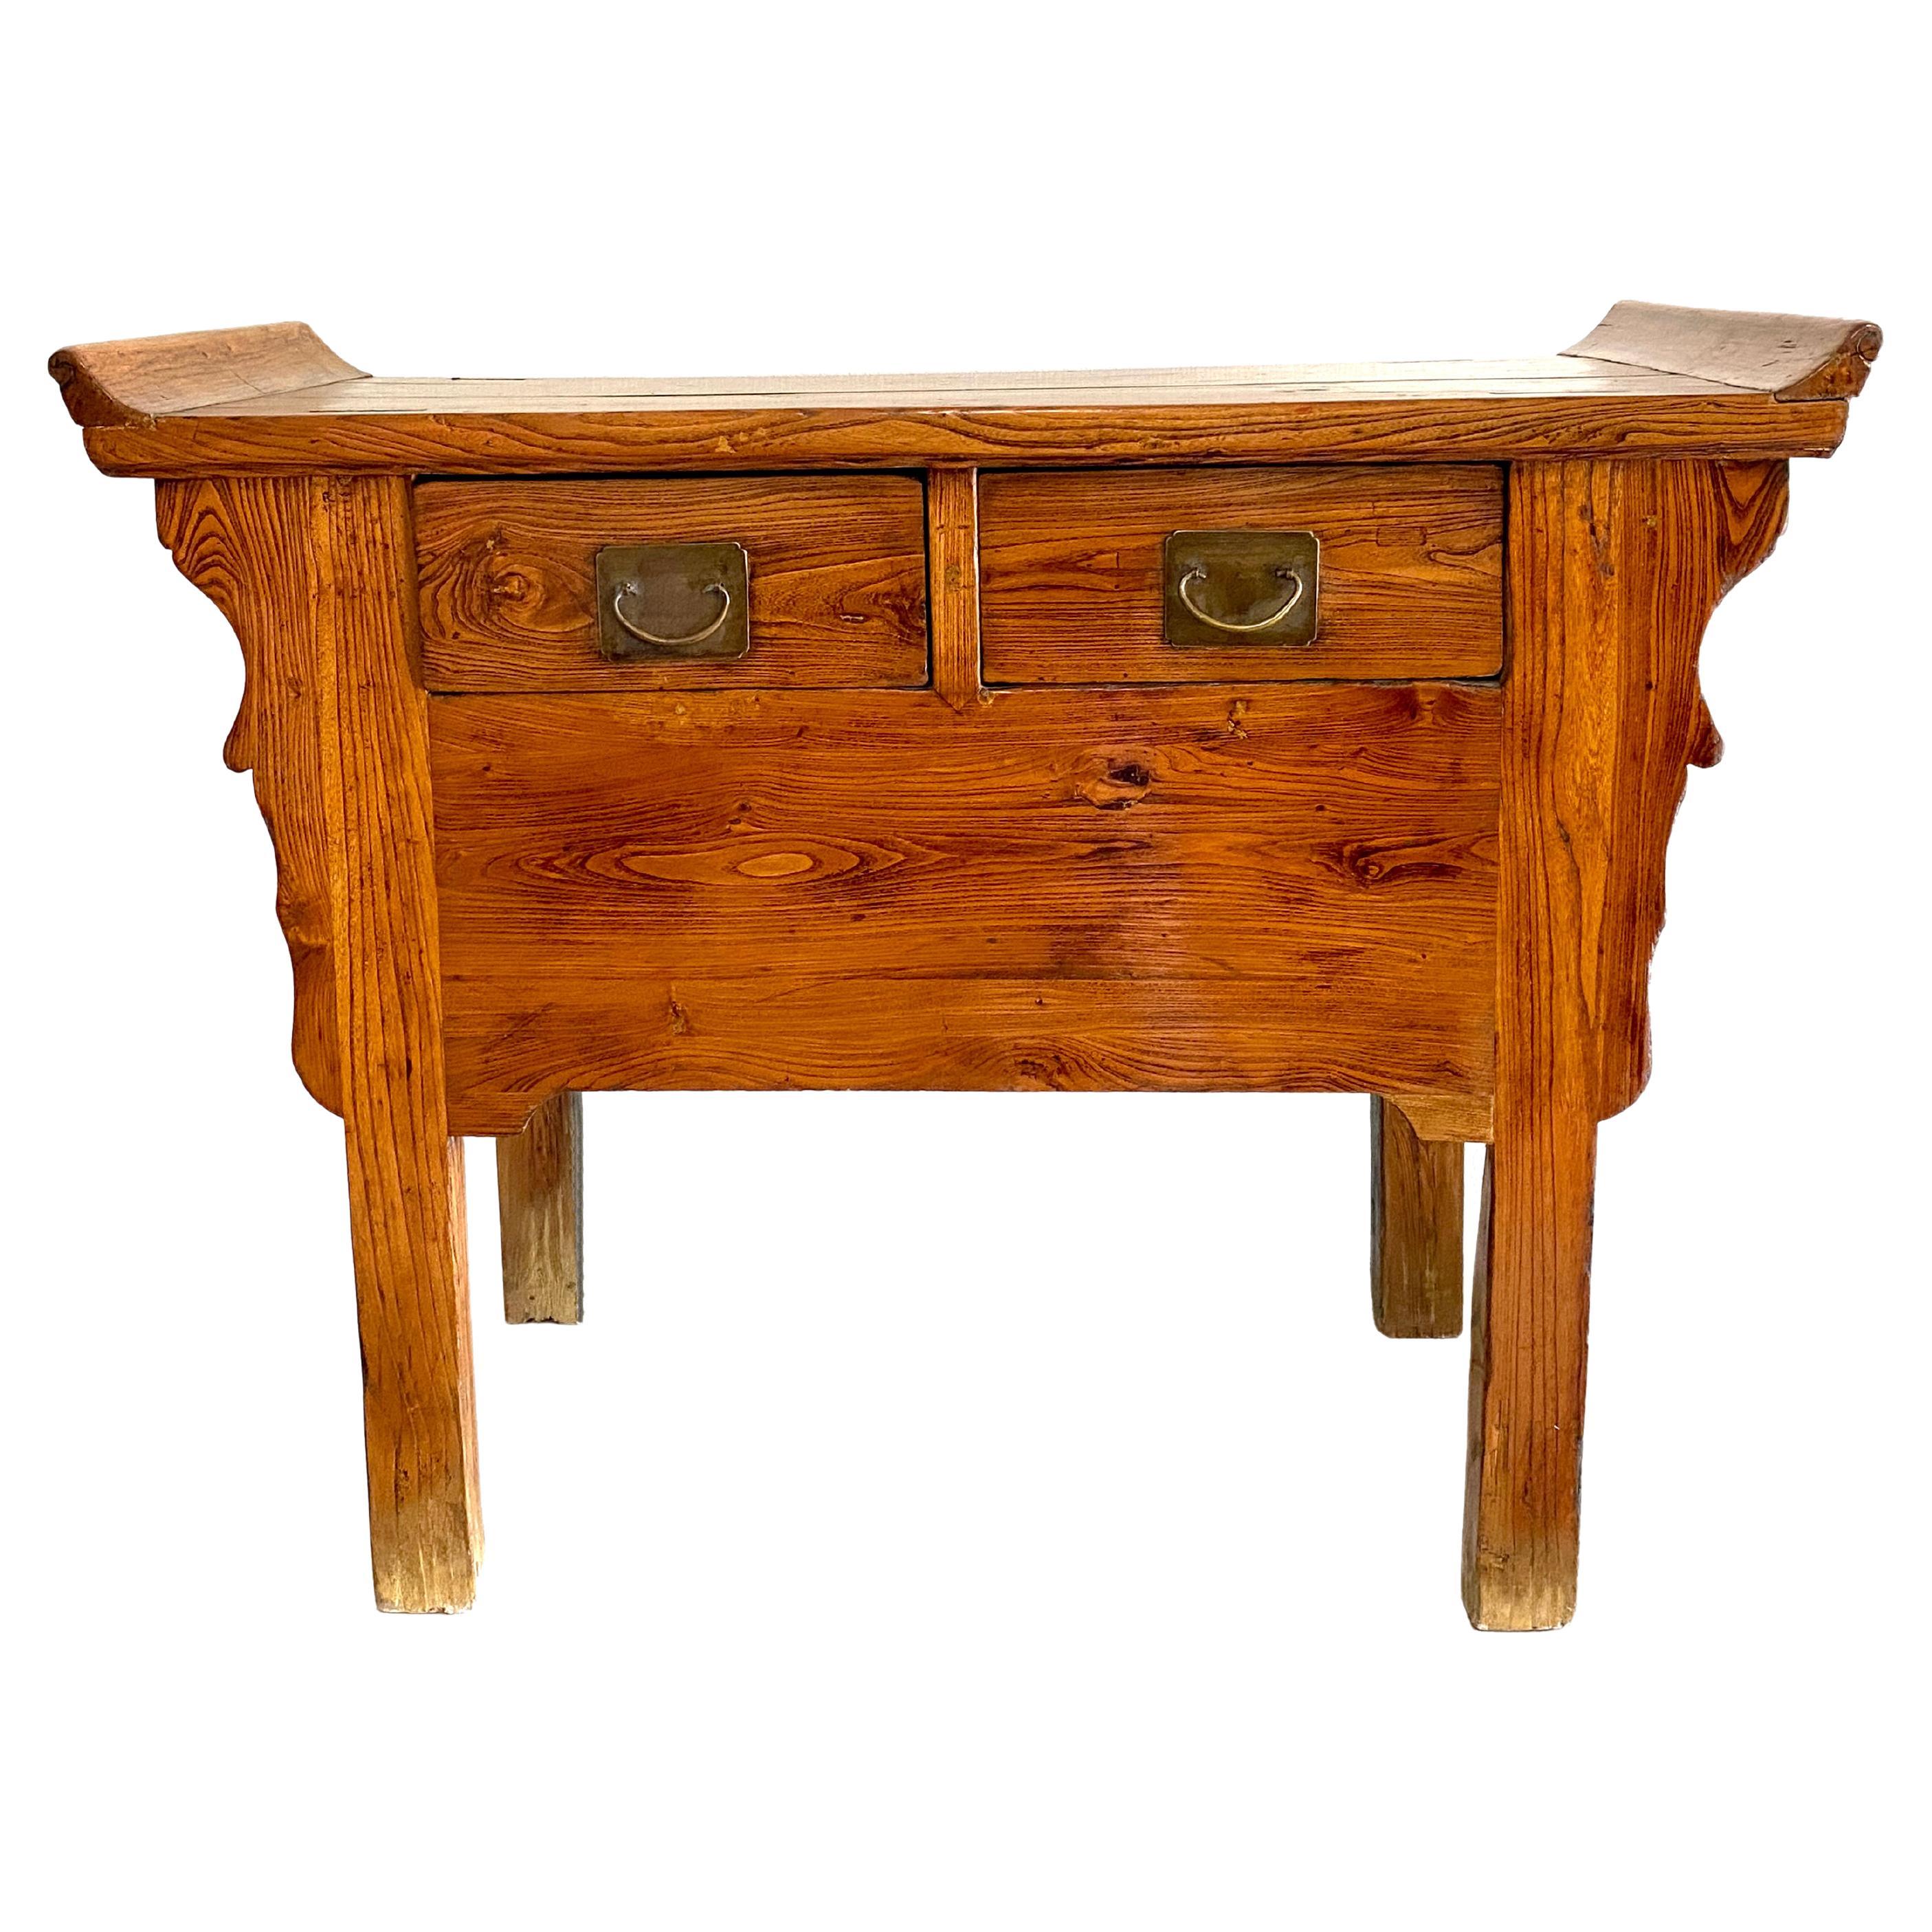 Early 20th Century Antique Chinese Beech Hardwood Double Drawer Coffer Table For Sale